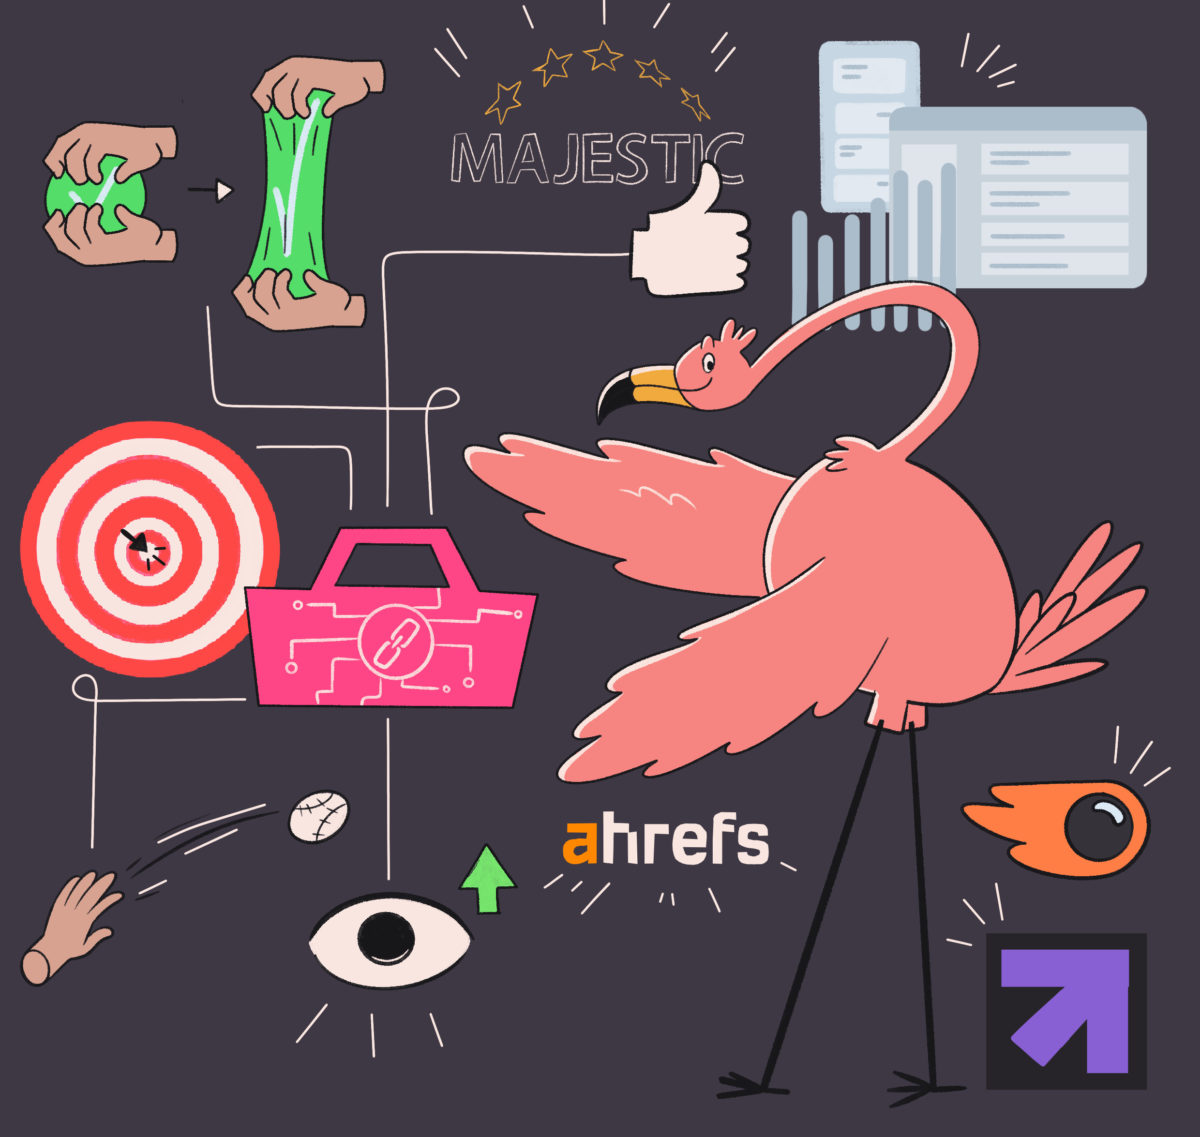 An illustration featuring a collage of assorted icons and elements, such as a flamingo, a target, tree hands, an eyeball, and various logos, sparking a whimsical or conceptual vibe.